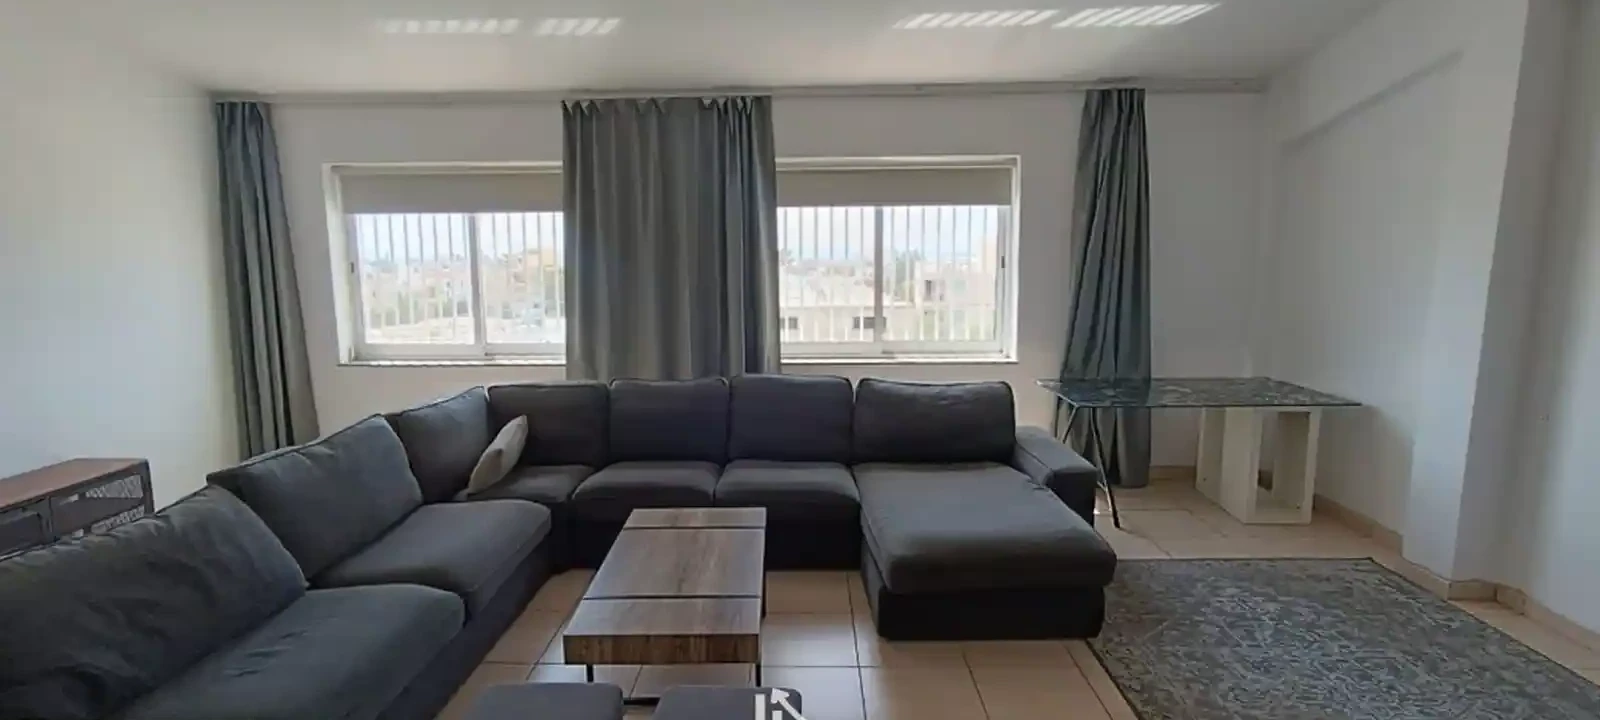 3-bedroom penthouse to rent €1.200, image 1